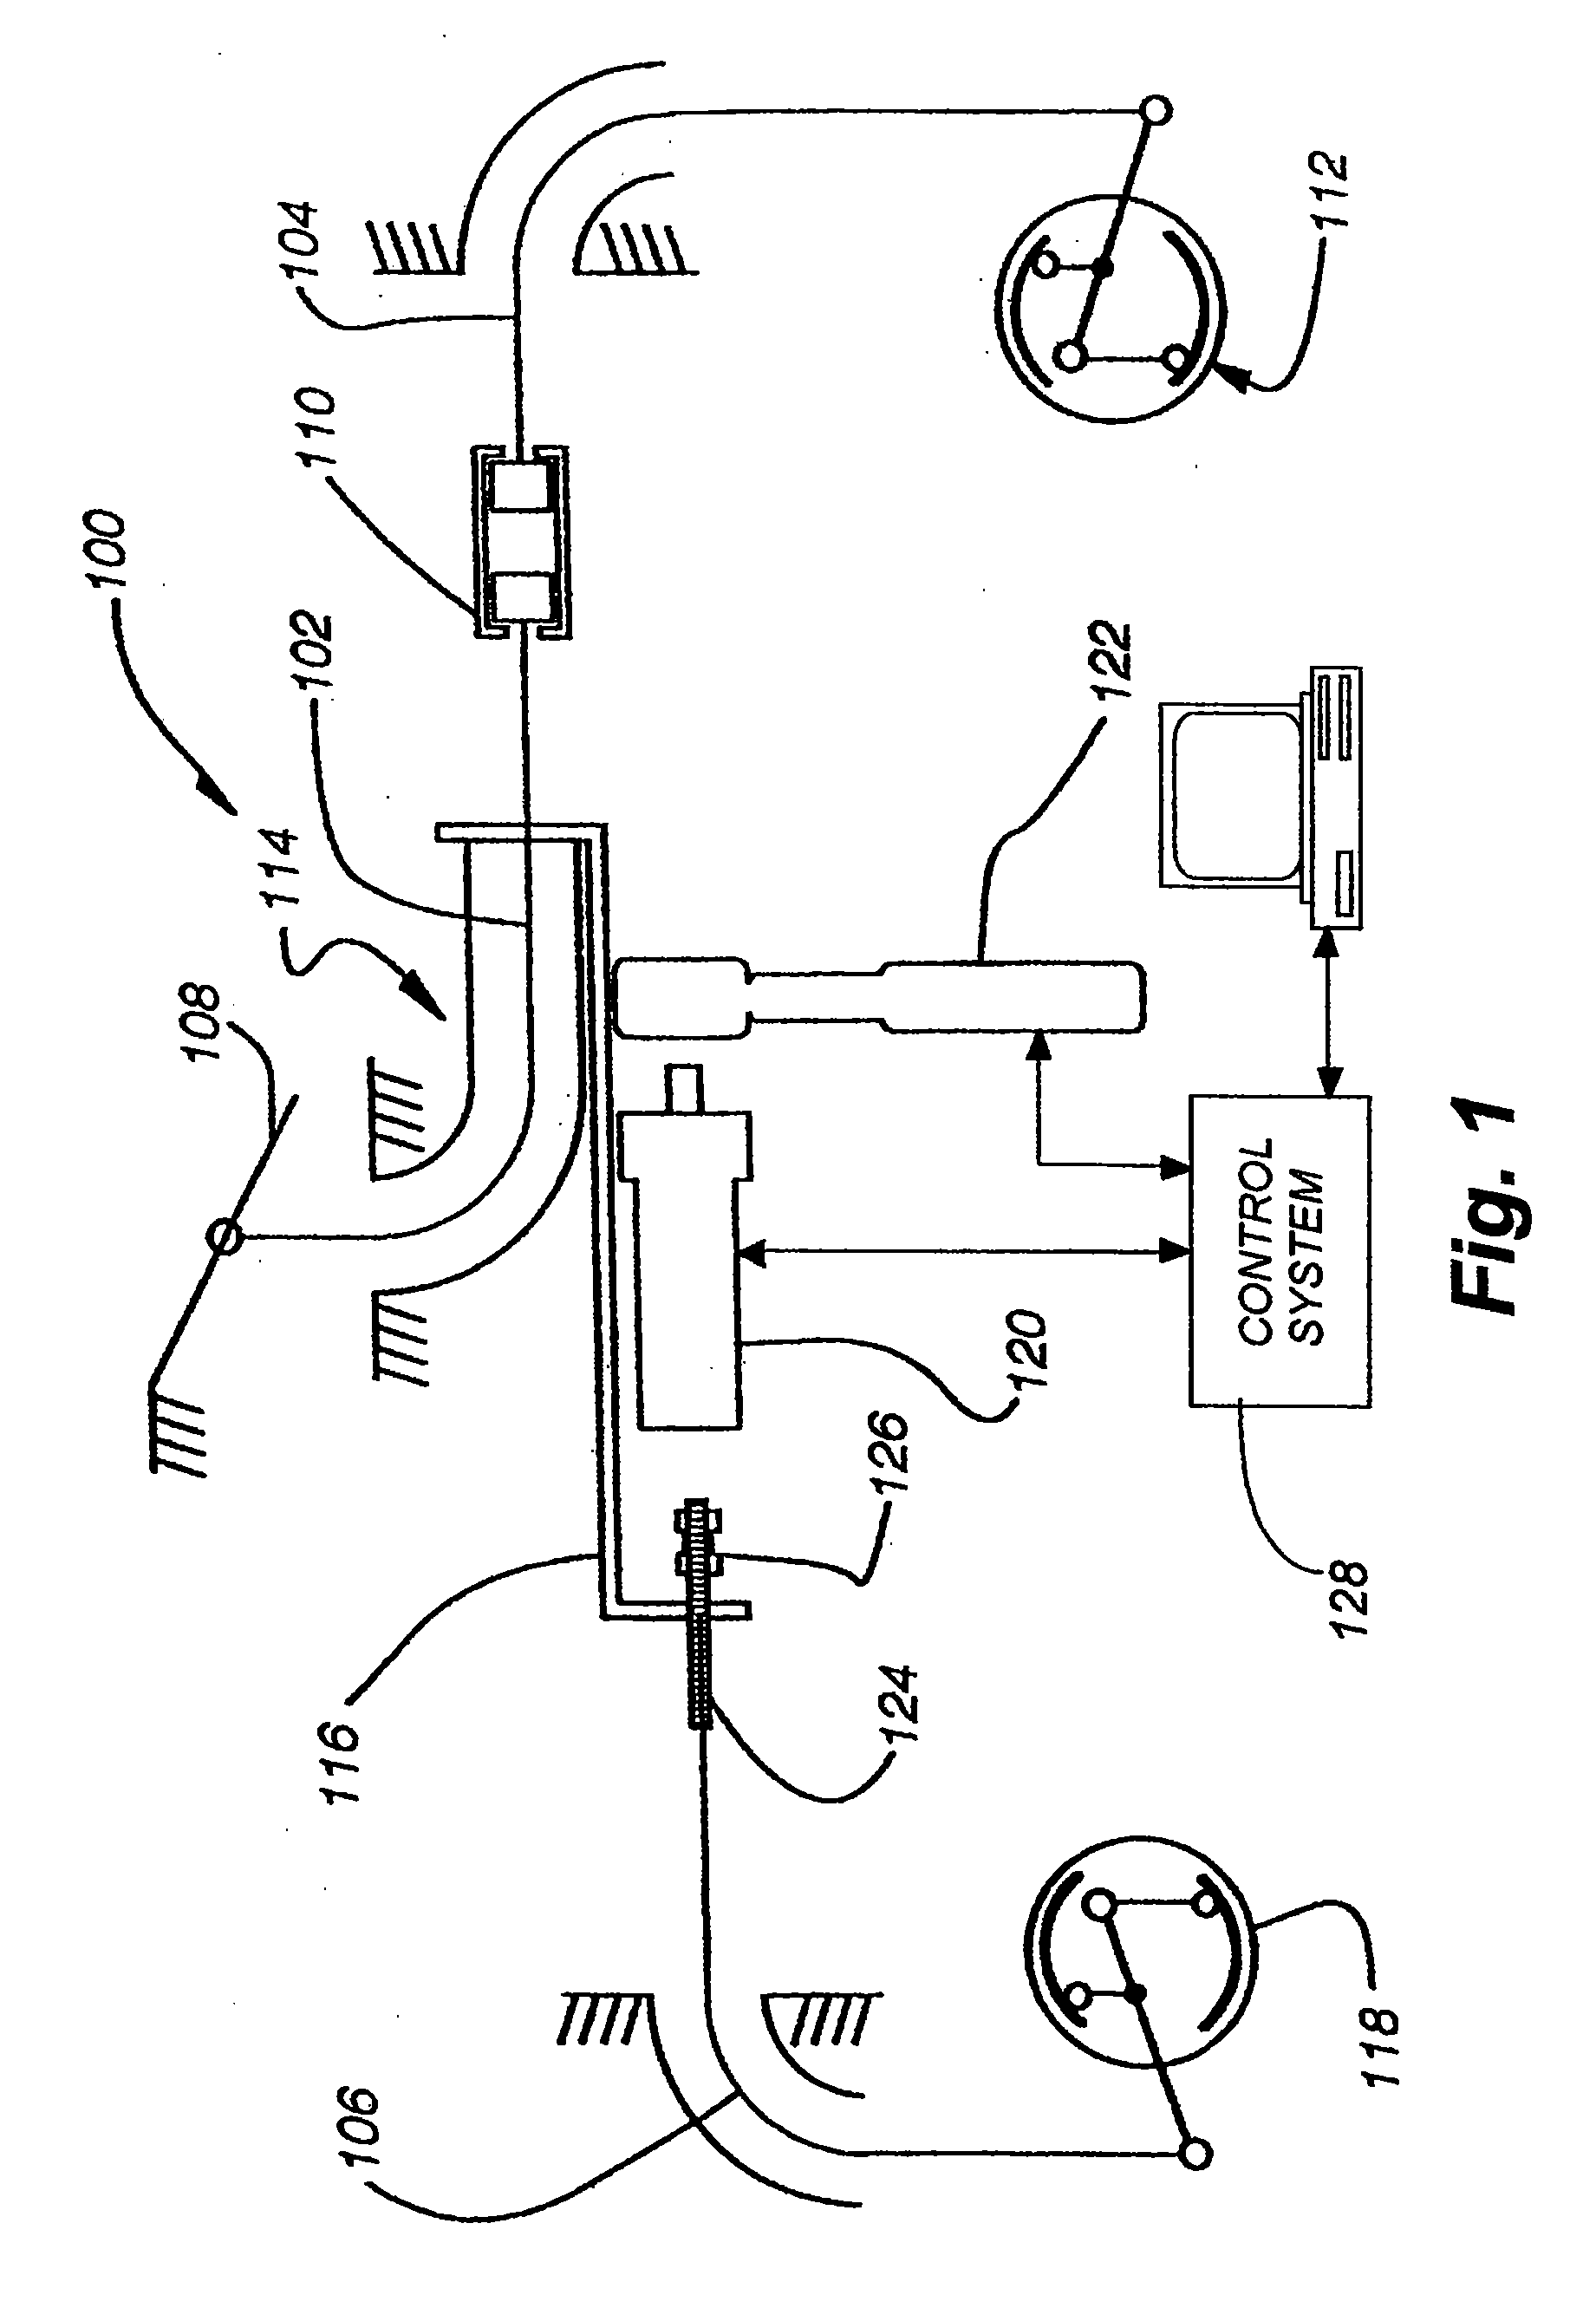 System and Method for Tensioning an Emergency Brake System